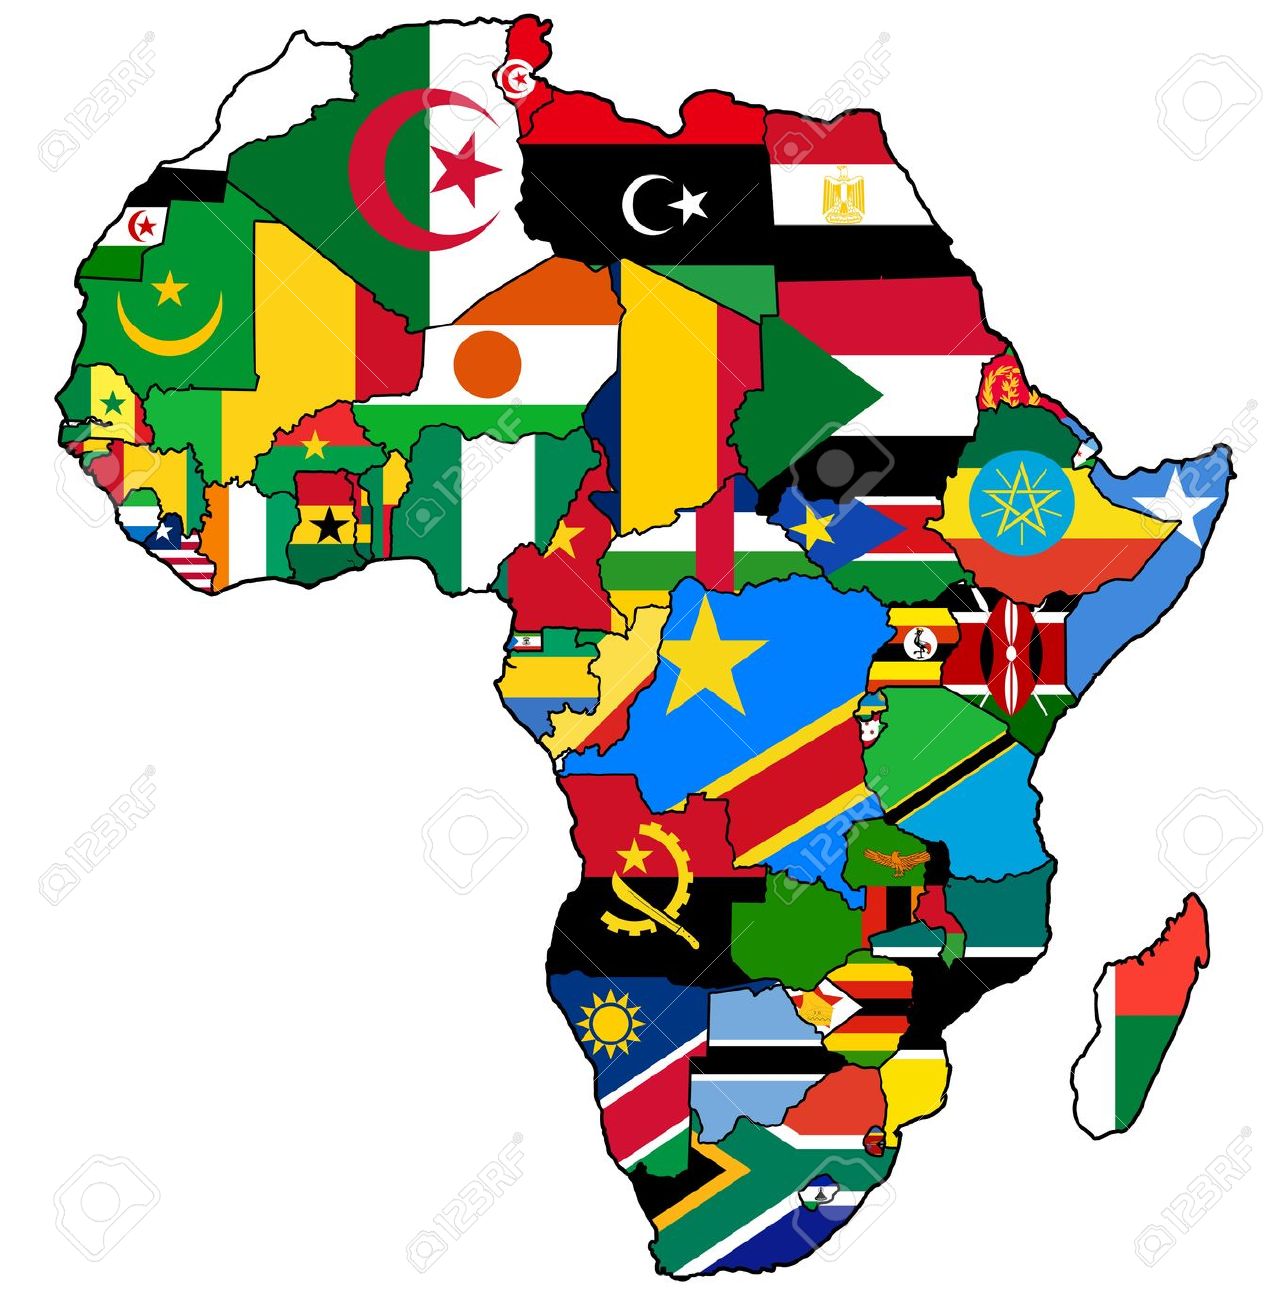 pays-africains